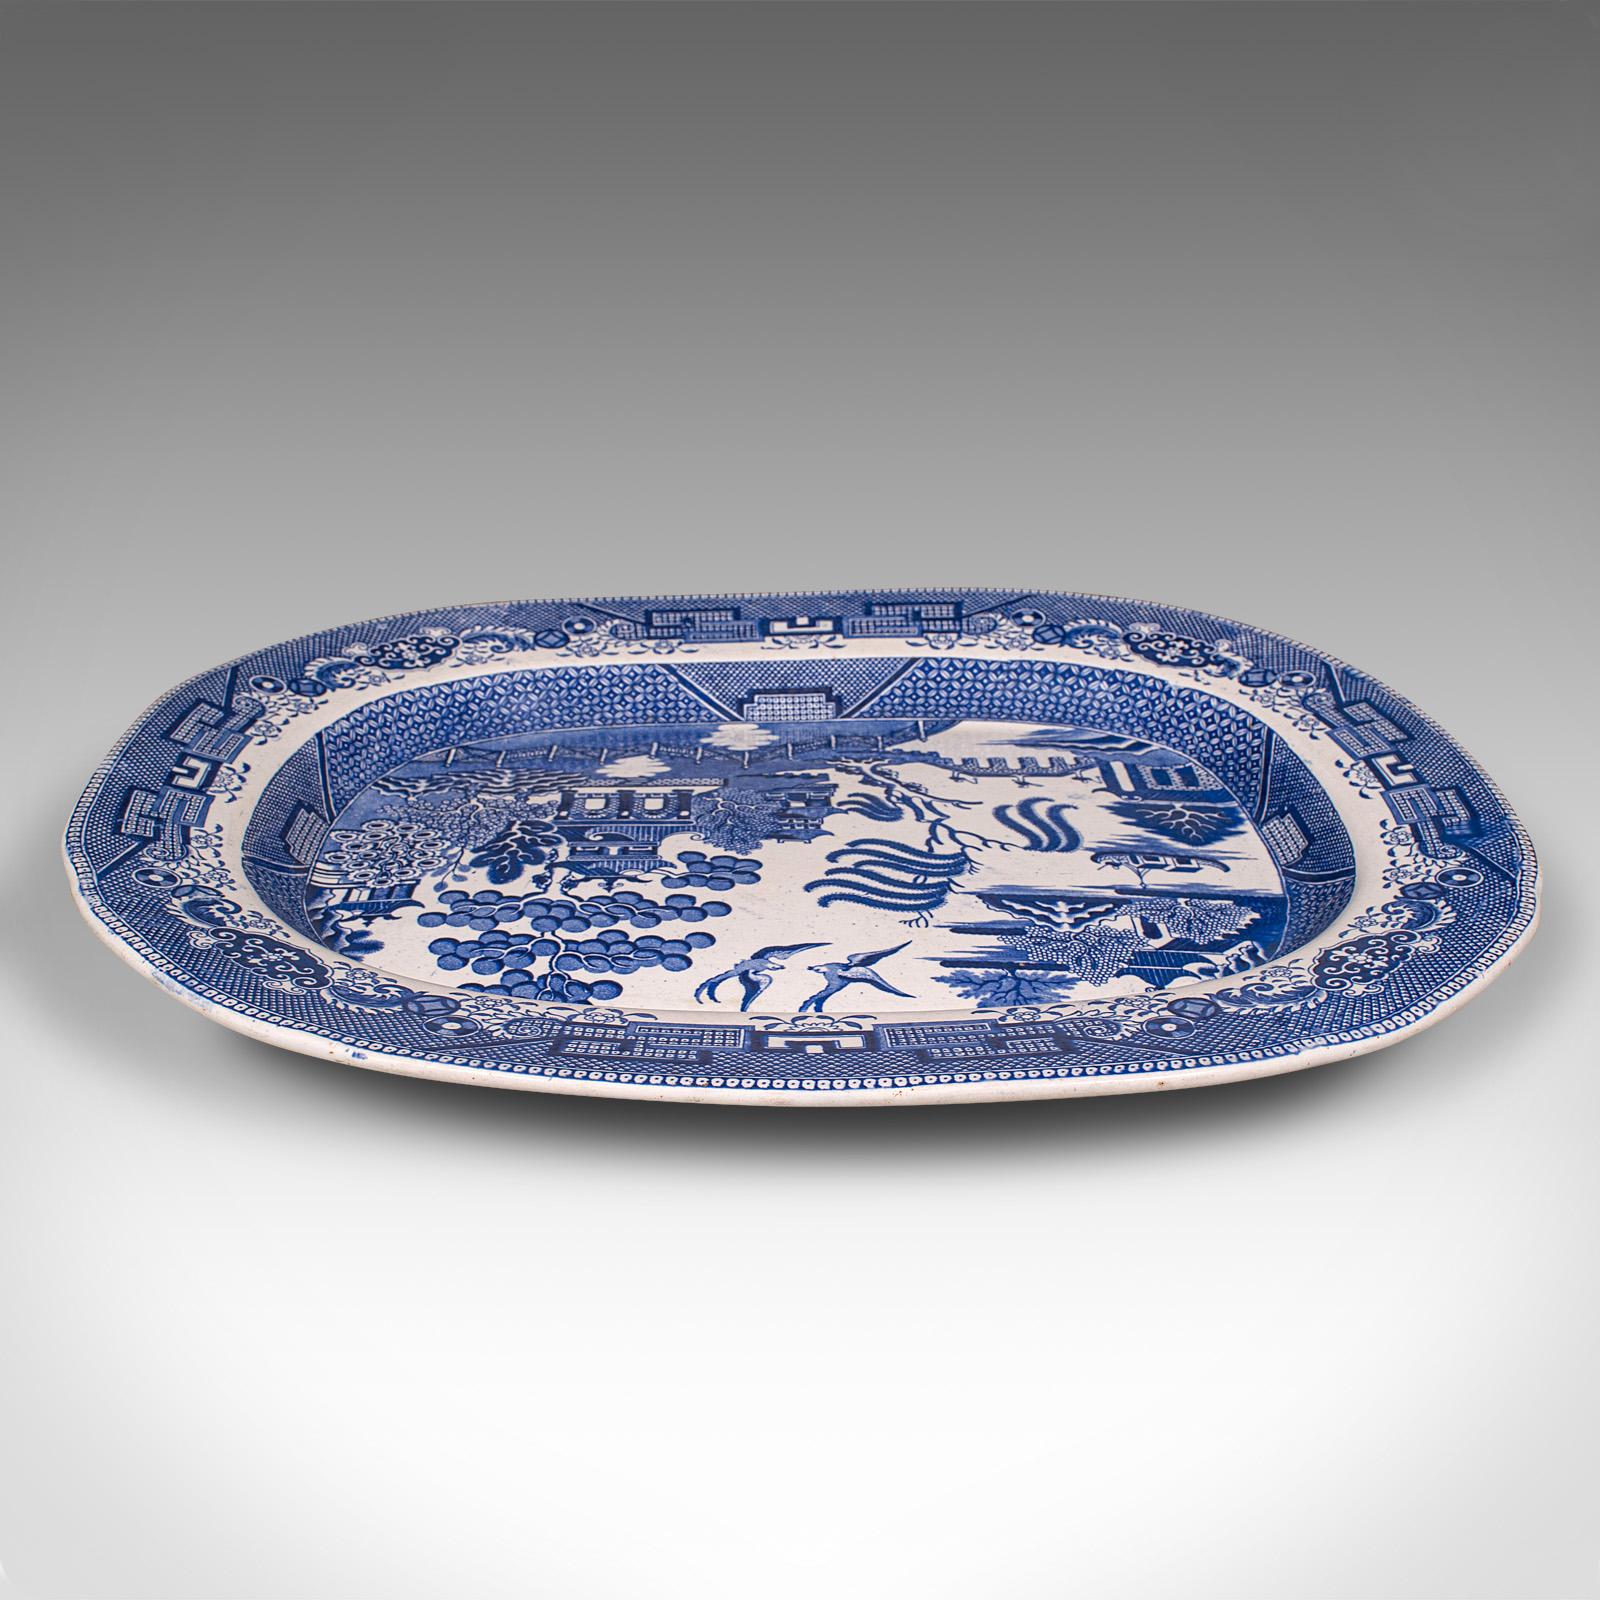 British Antique Willow Pattern Serving Plate, English, Ceramic, Meat Dish, Victorian For Sale